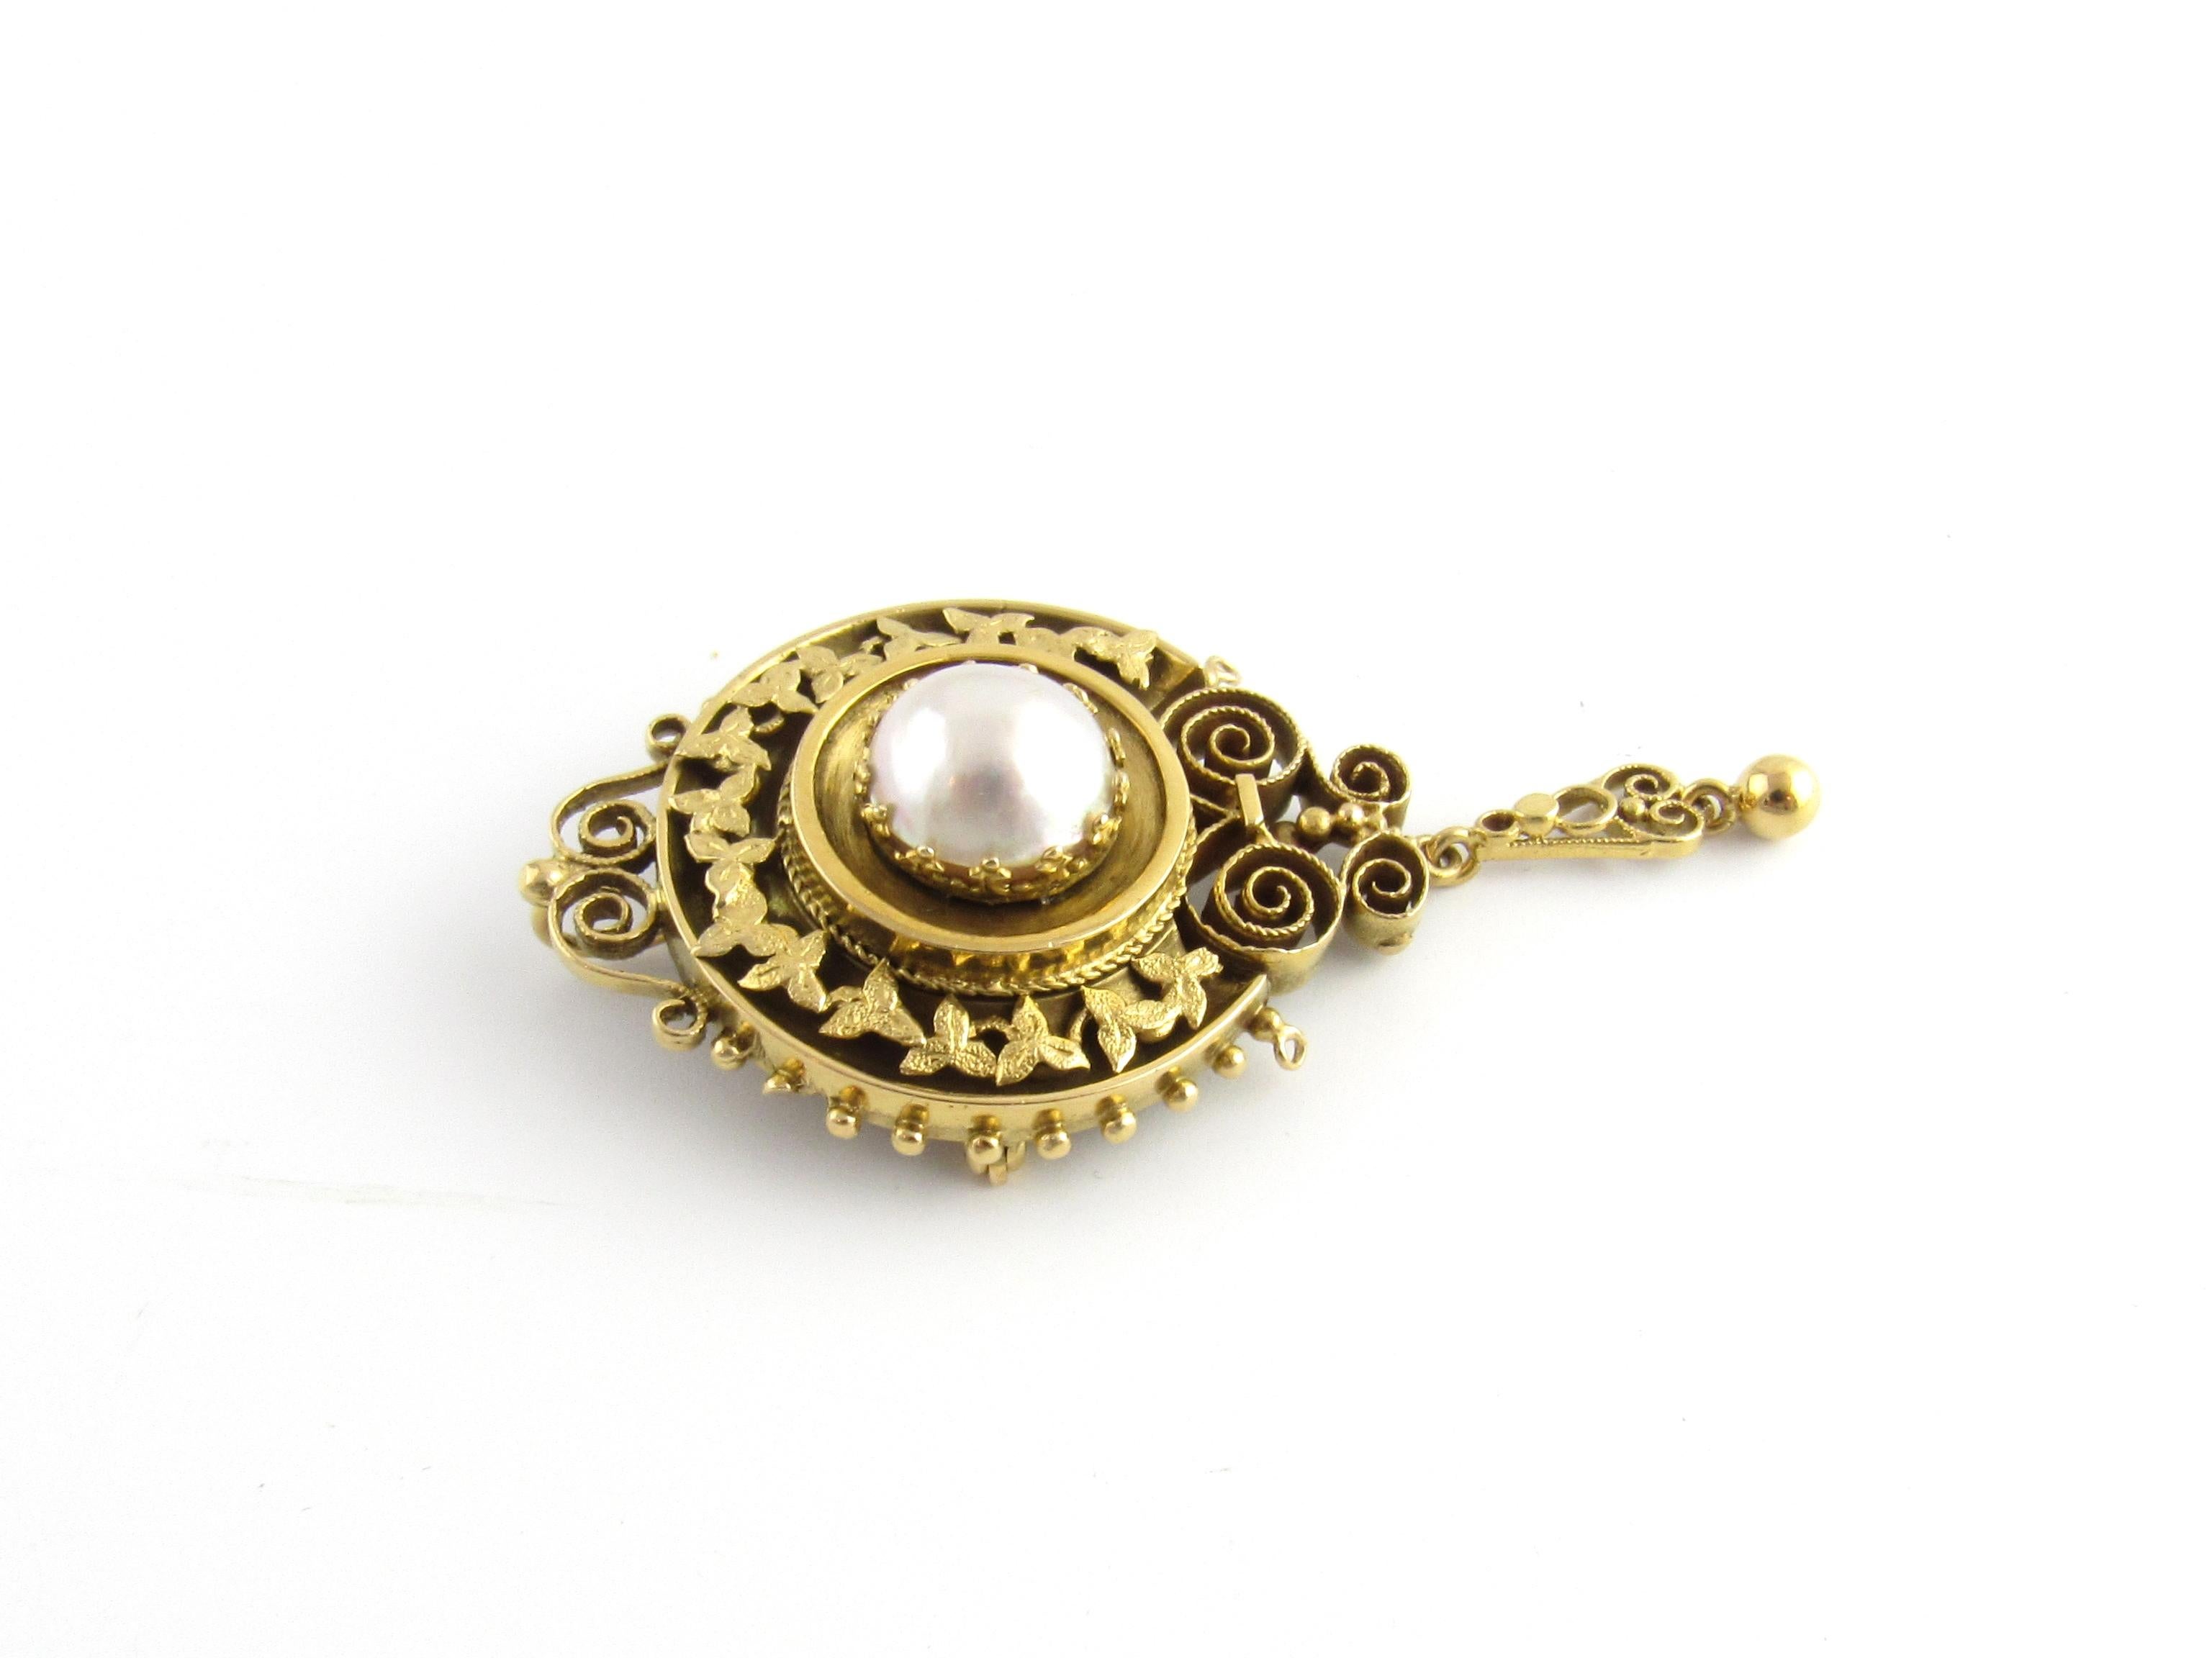 Cabochon Etruscan Revival 14K Yellow Gold and Mabe Pearl Pin Pendant For Sale